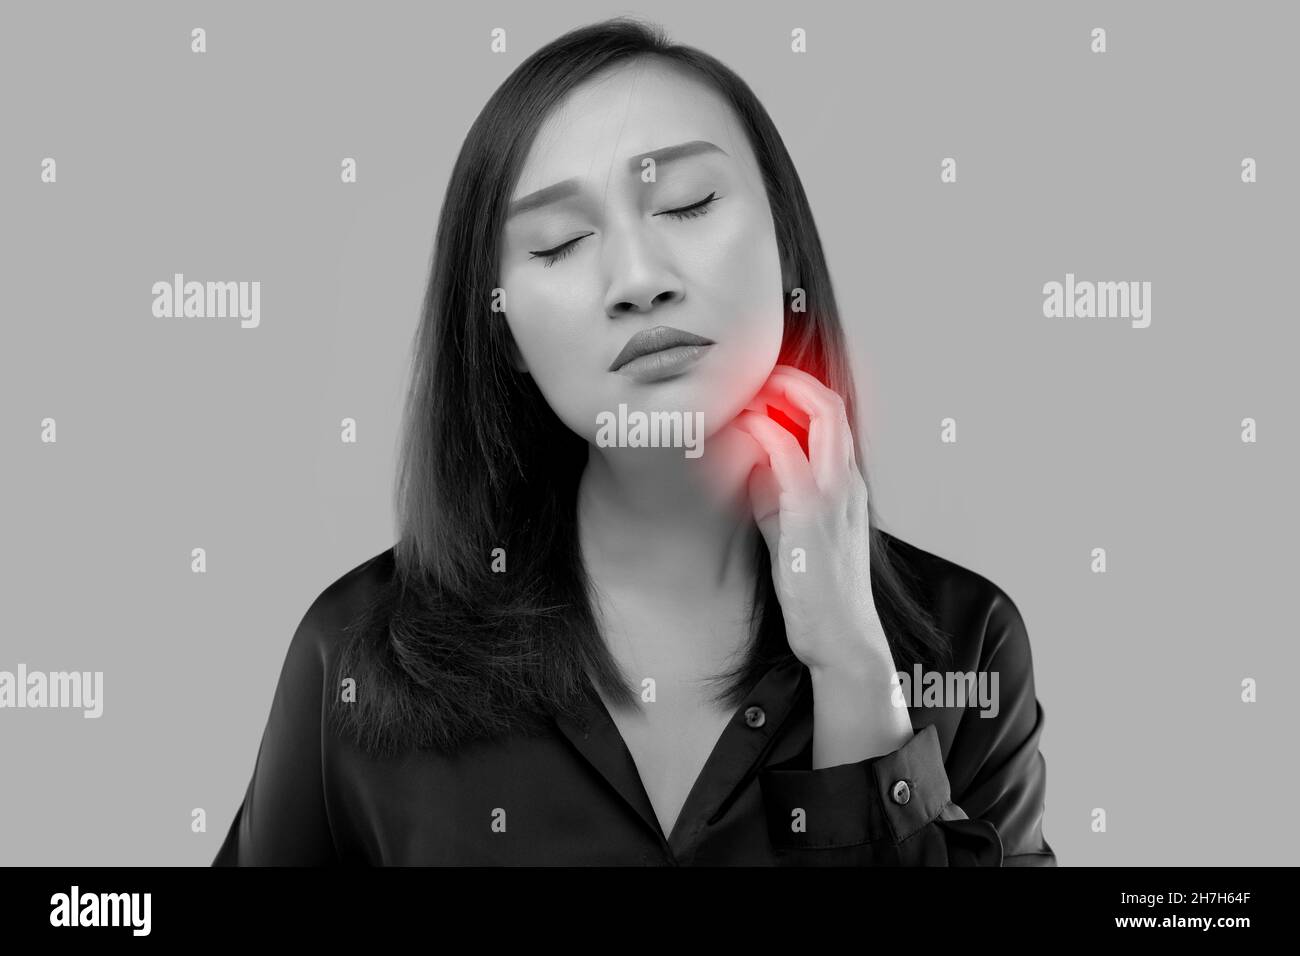 Asian woman scratched her neck on a gray background. Stock Photo